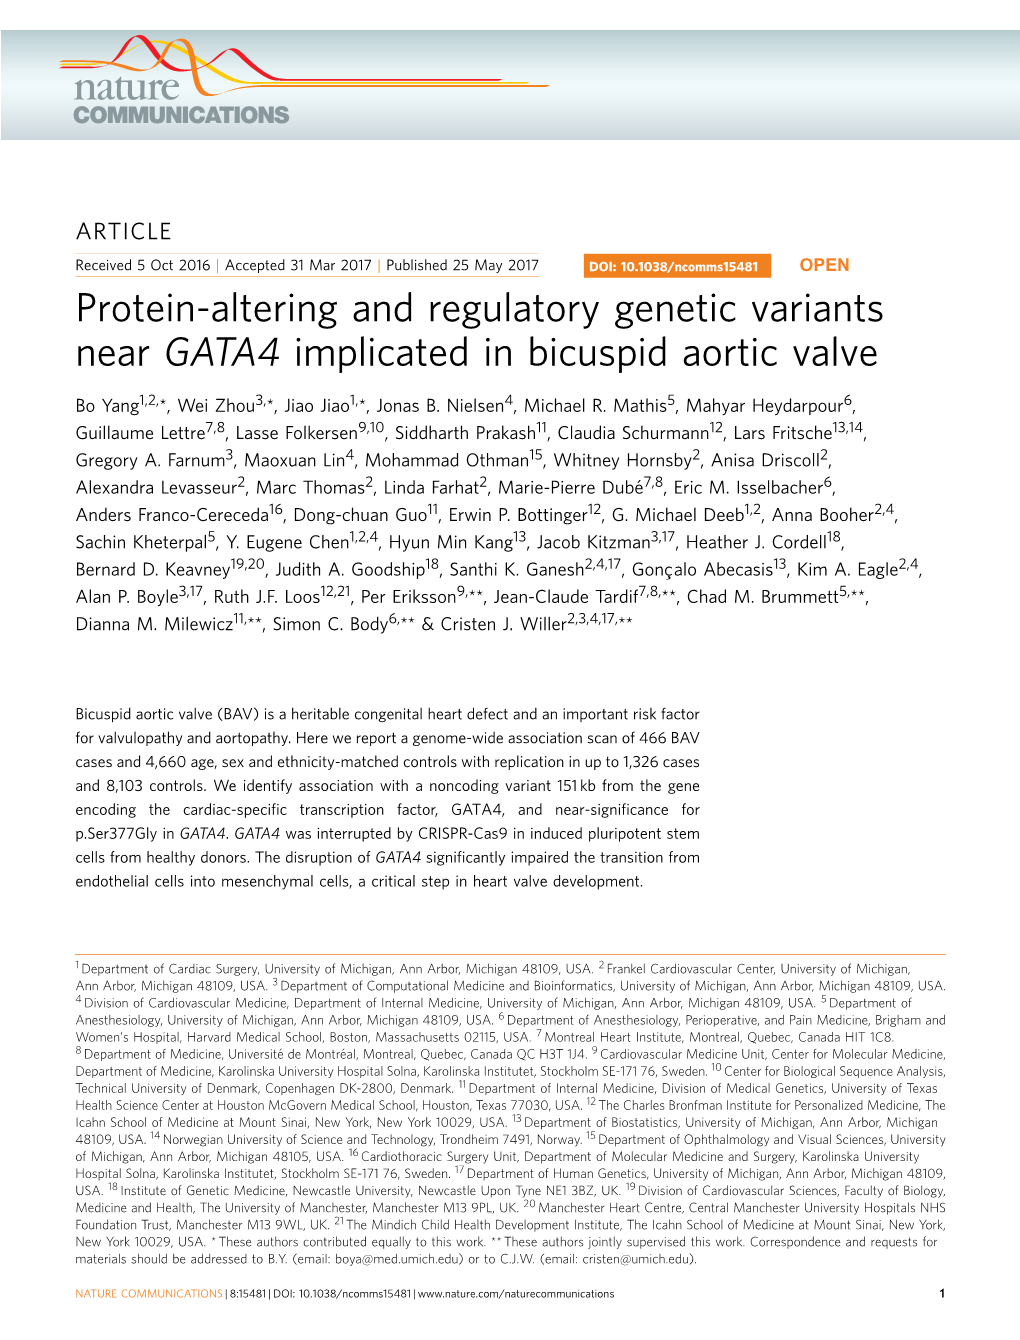 Protein-Altering and Regulatory Genetic Variants Near GATA4 Implicated in Bicuspid Aortic Valve